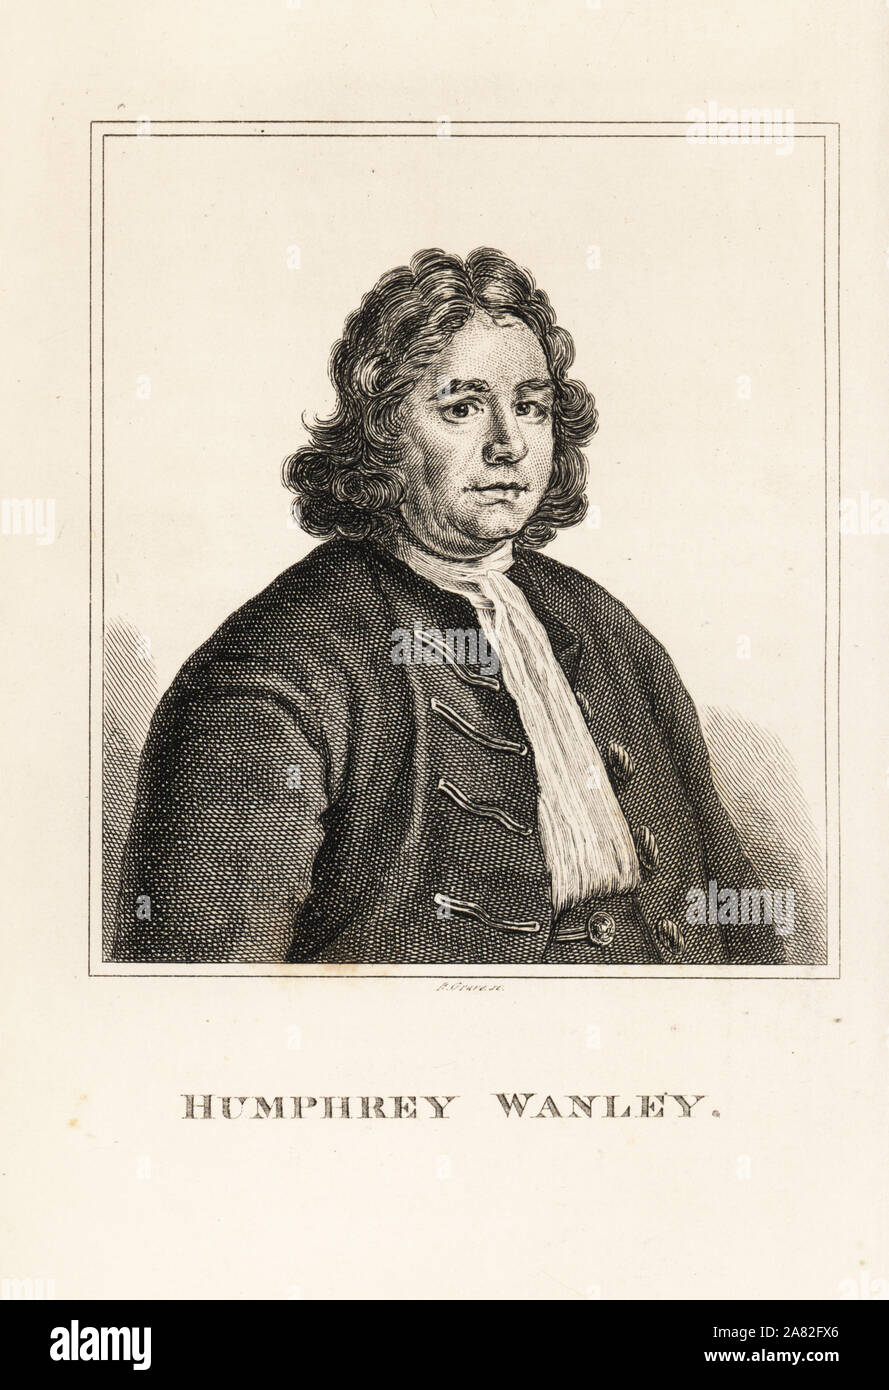 Humphrey Wanley, antiquarian and librarian, died 1726. Engraving by R. Grave from James Caulfield's Portraits, Memoirs and Characters of Remarkable Persons, London, 1819. Stock Photo